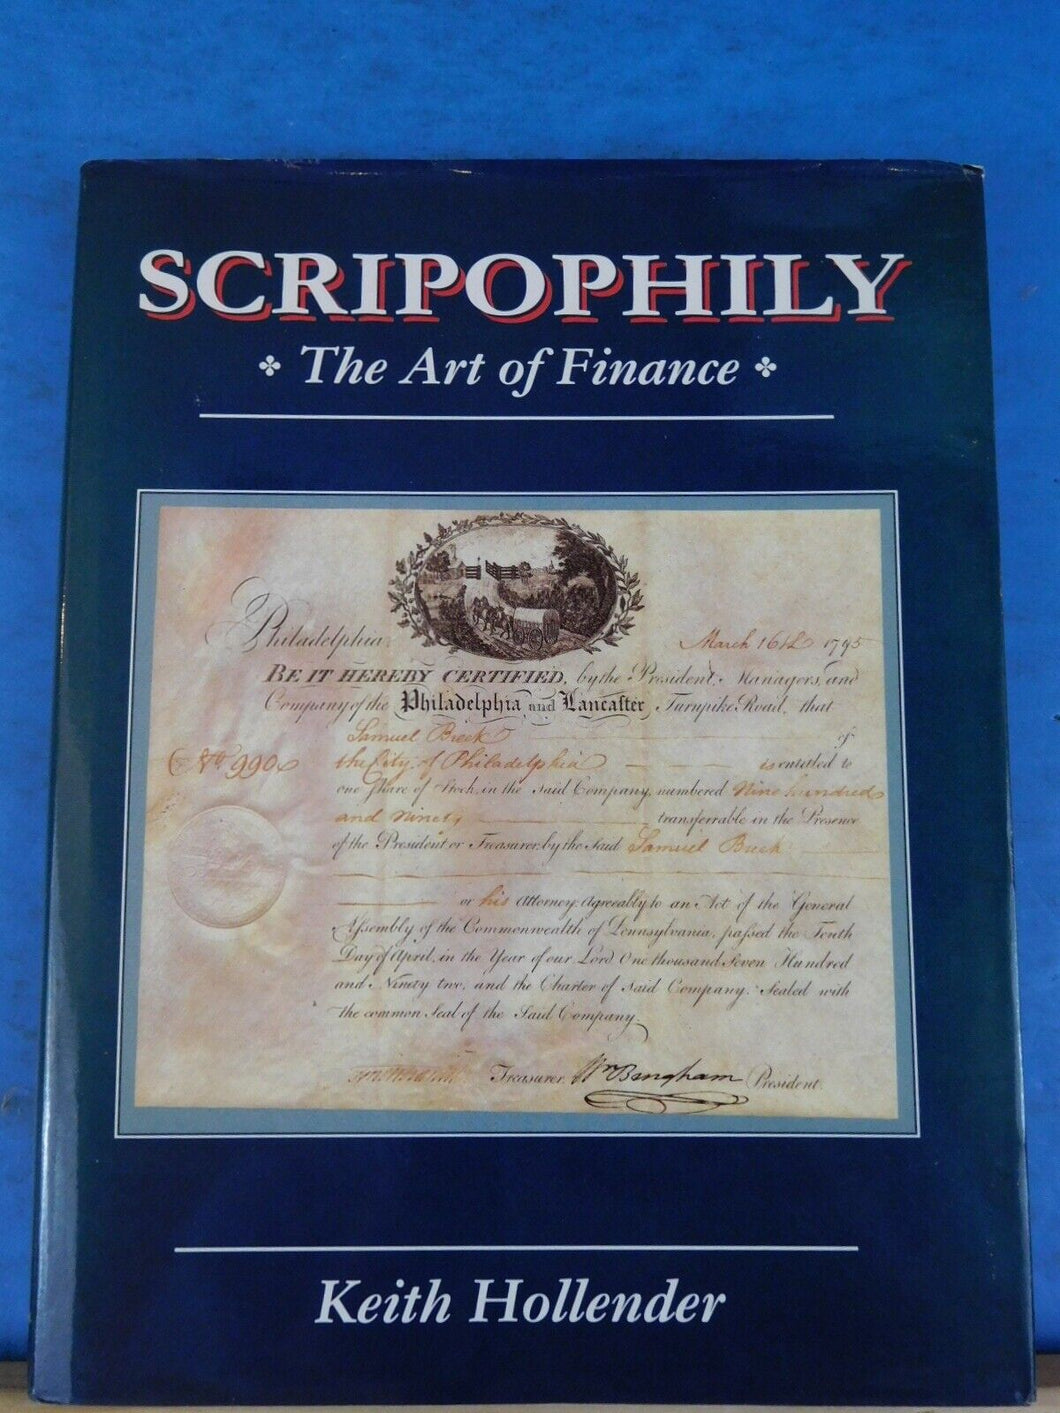 Scripophilly, The Art of Finance by Keith Hollender w dust jacket